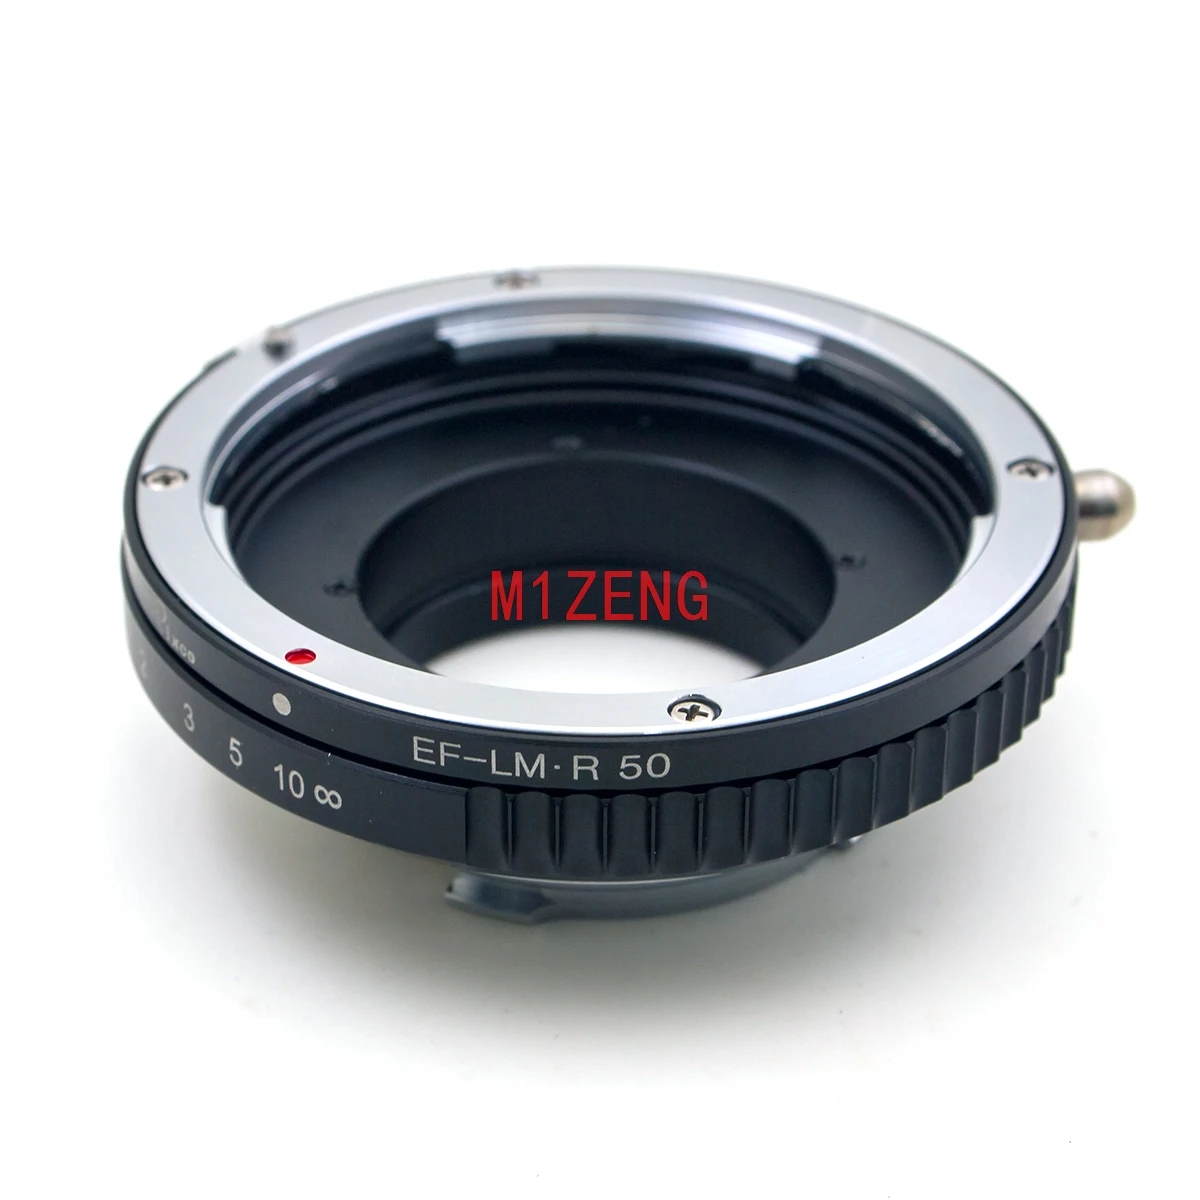 

EOS-LM Rangefinder Focus Adapter for 50mm Canon EOS Mount lens to Leica M L/M m240 m11 m10 M9 M8 M7 M6 M5 m3 m2 M-P camera